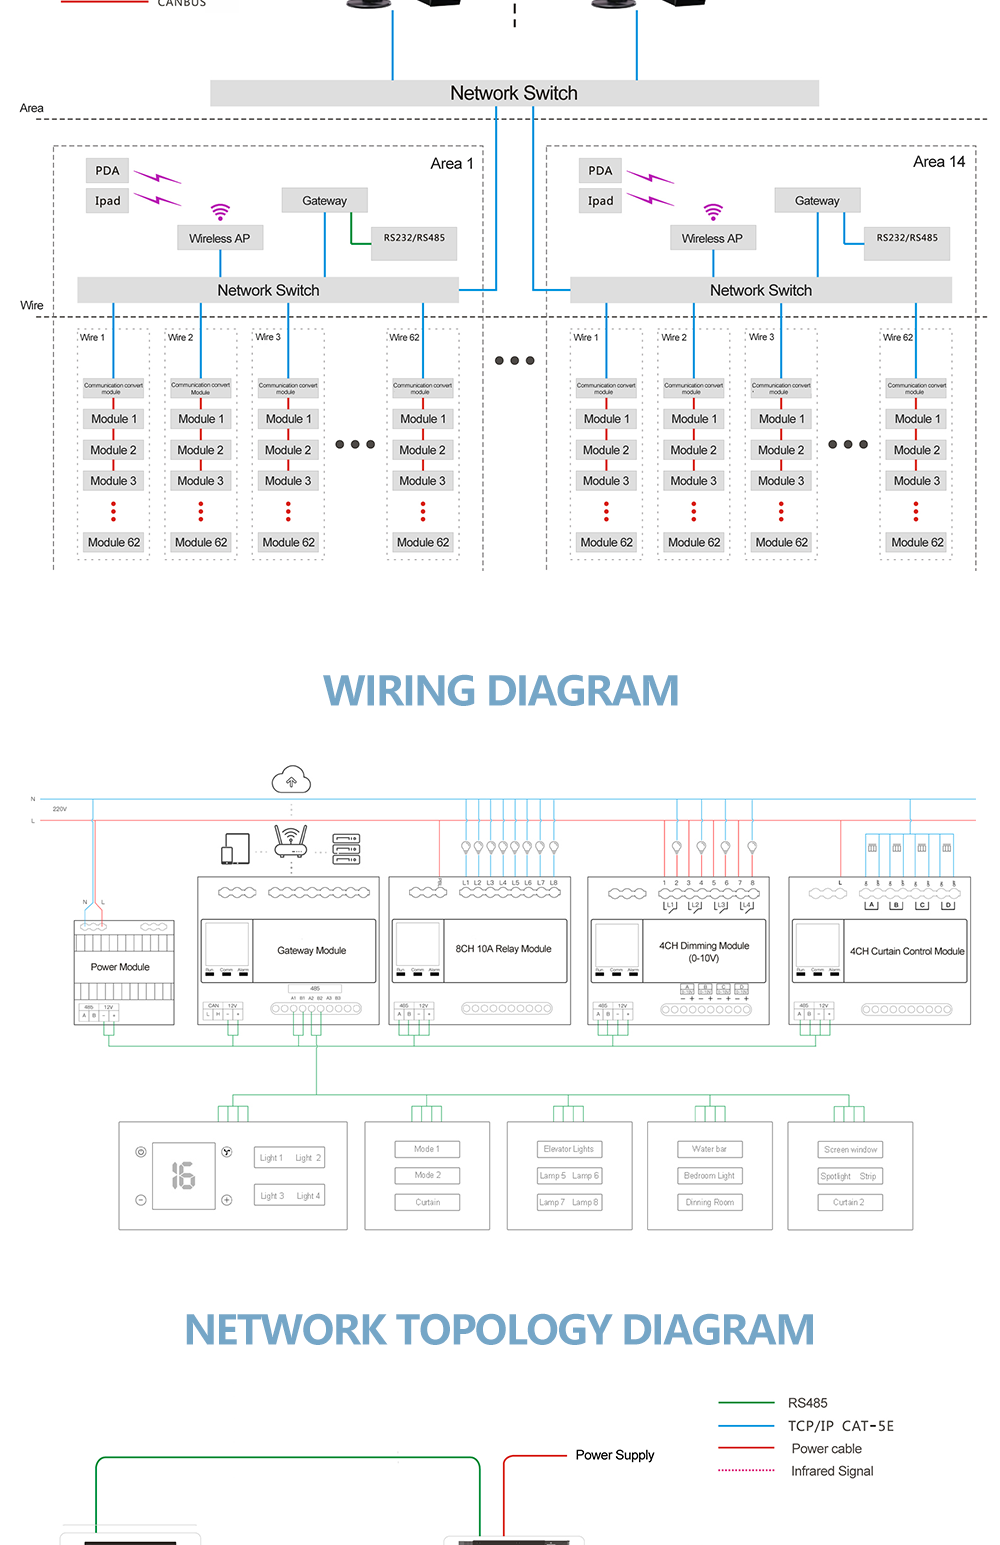 Network and Wiring Diagram.png